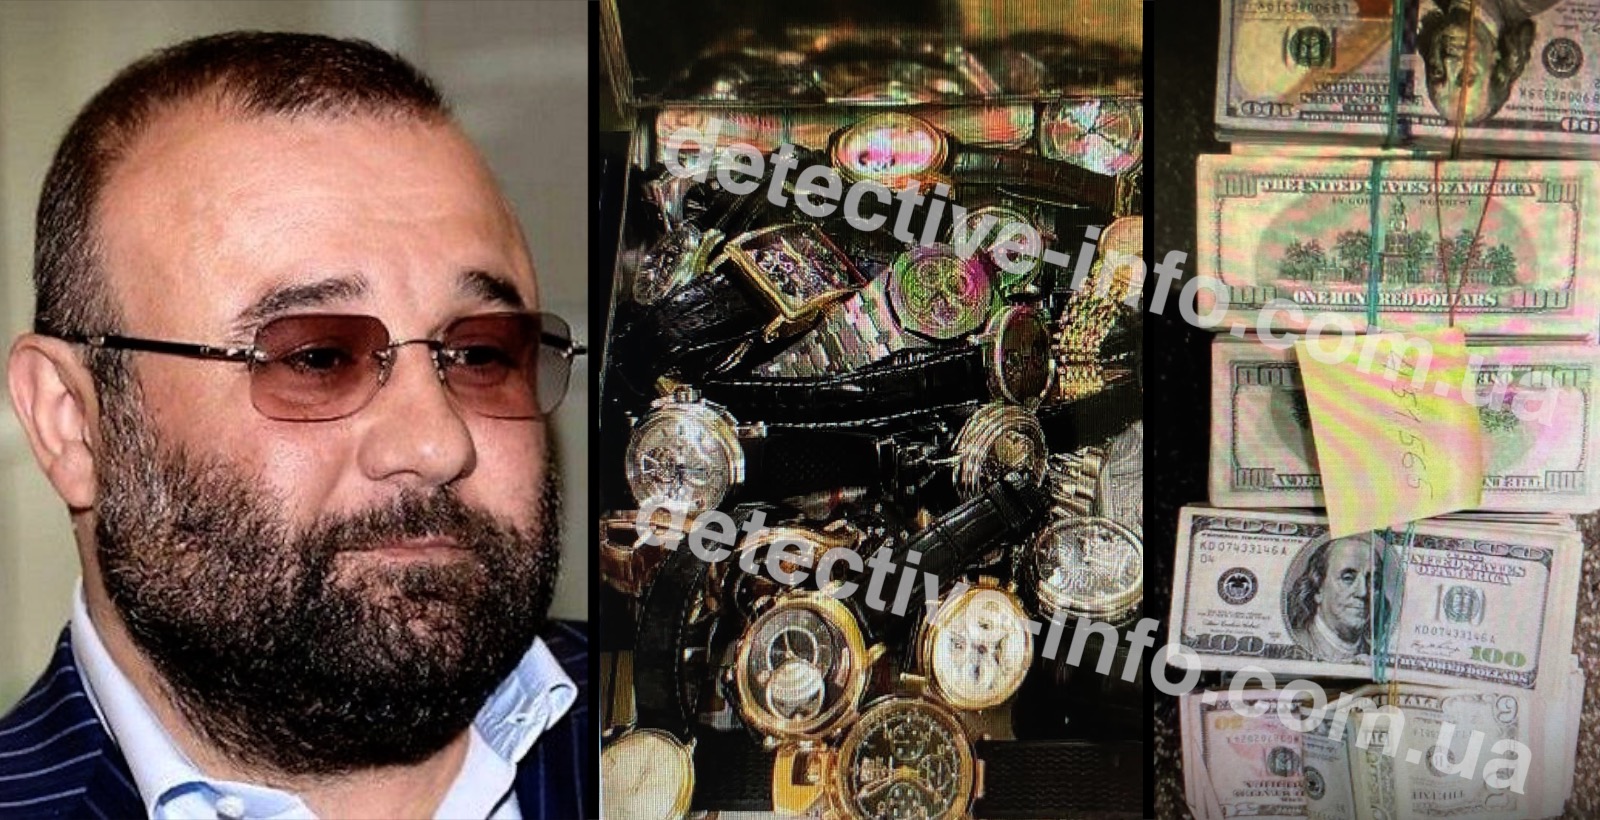 The residence of "Narika" was searched in Berlin: about half a million dollars and a collection of elite chronographs were seized